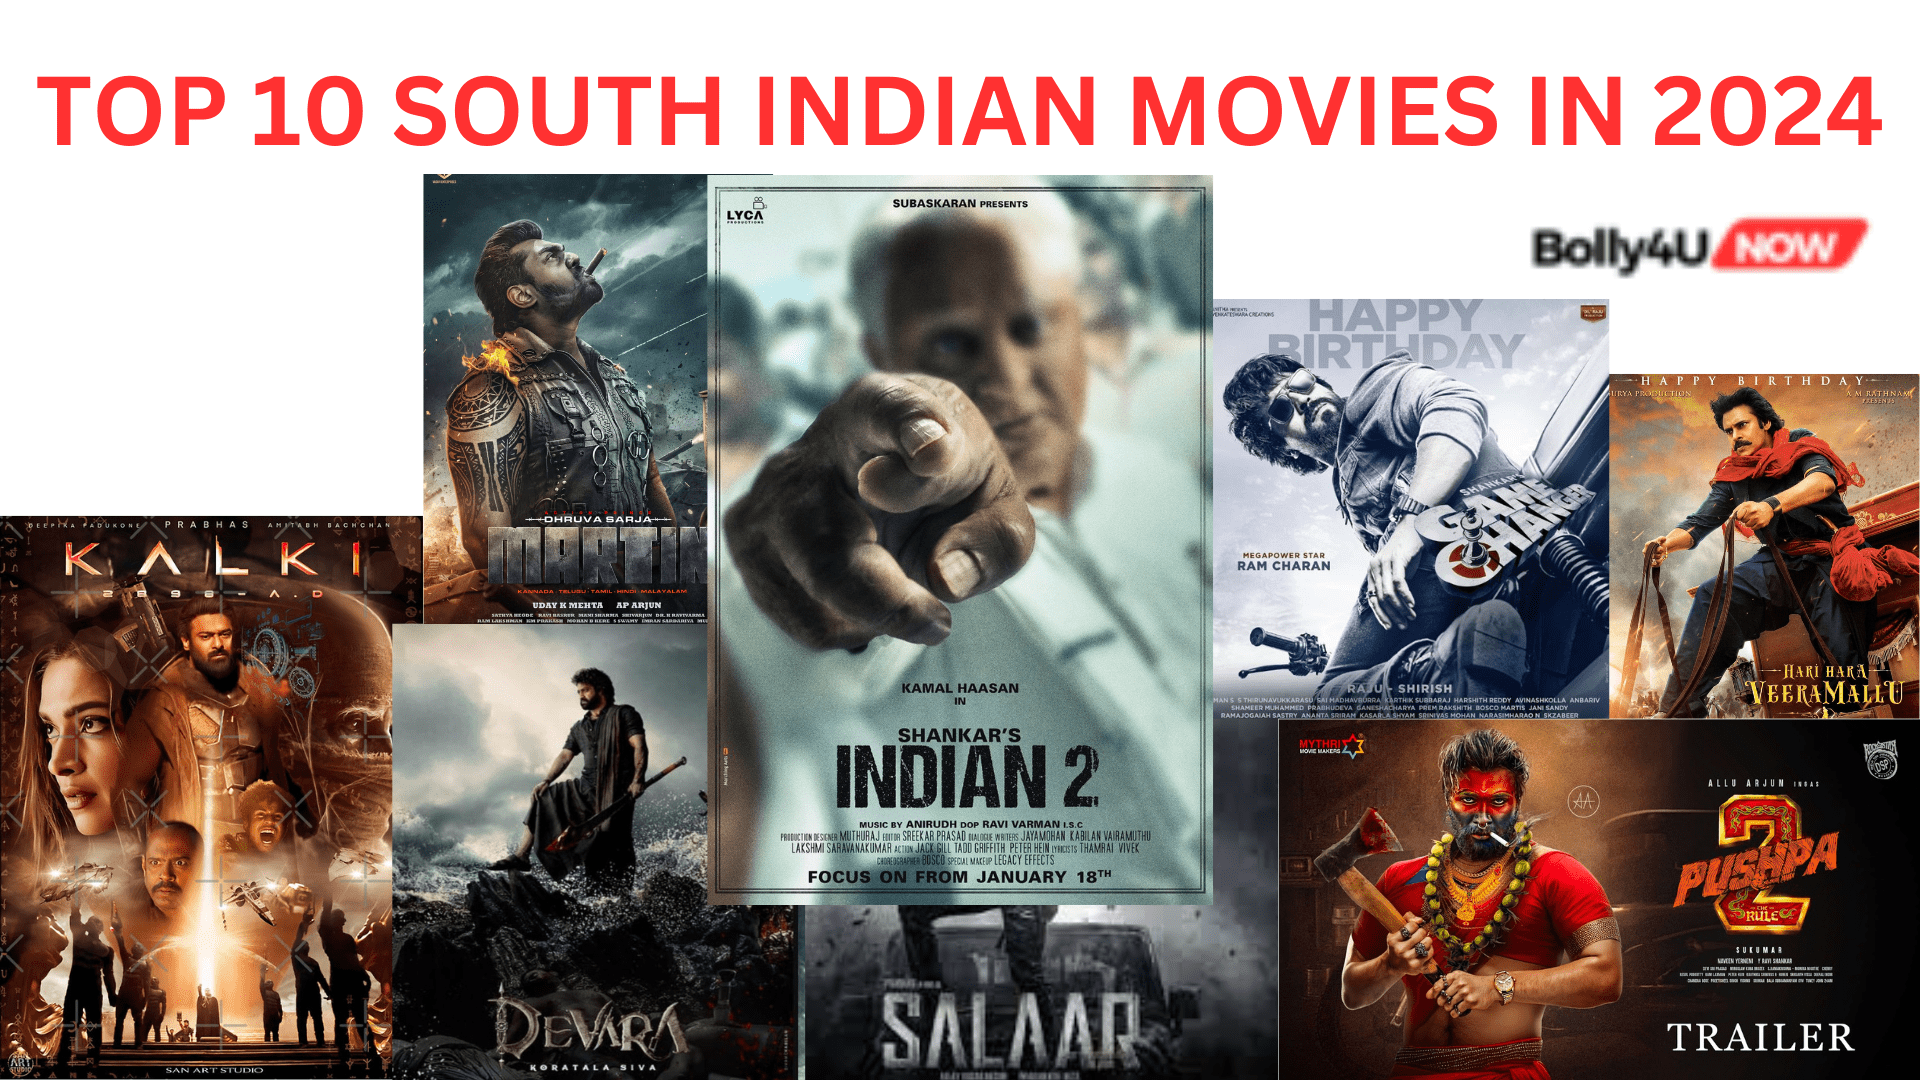 TOP 10 SOUTH INDIAN MOVIES IN 2024 Bolly4U Now